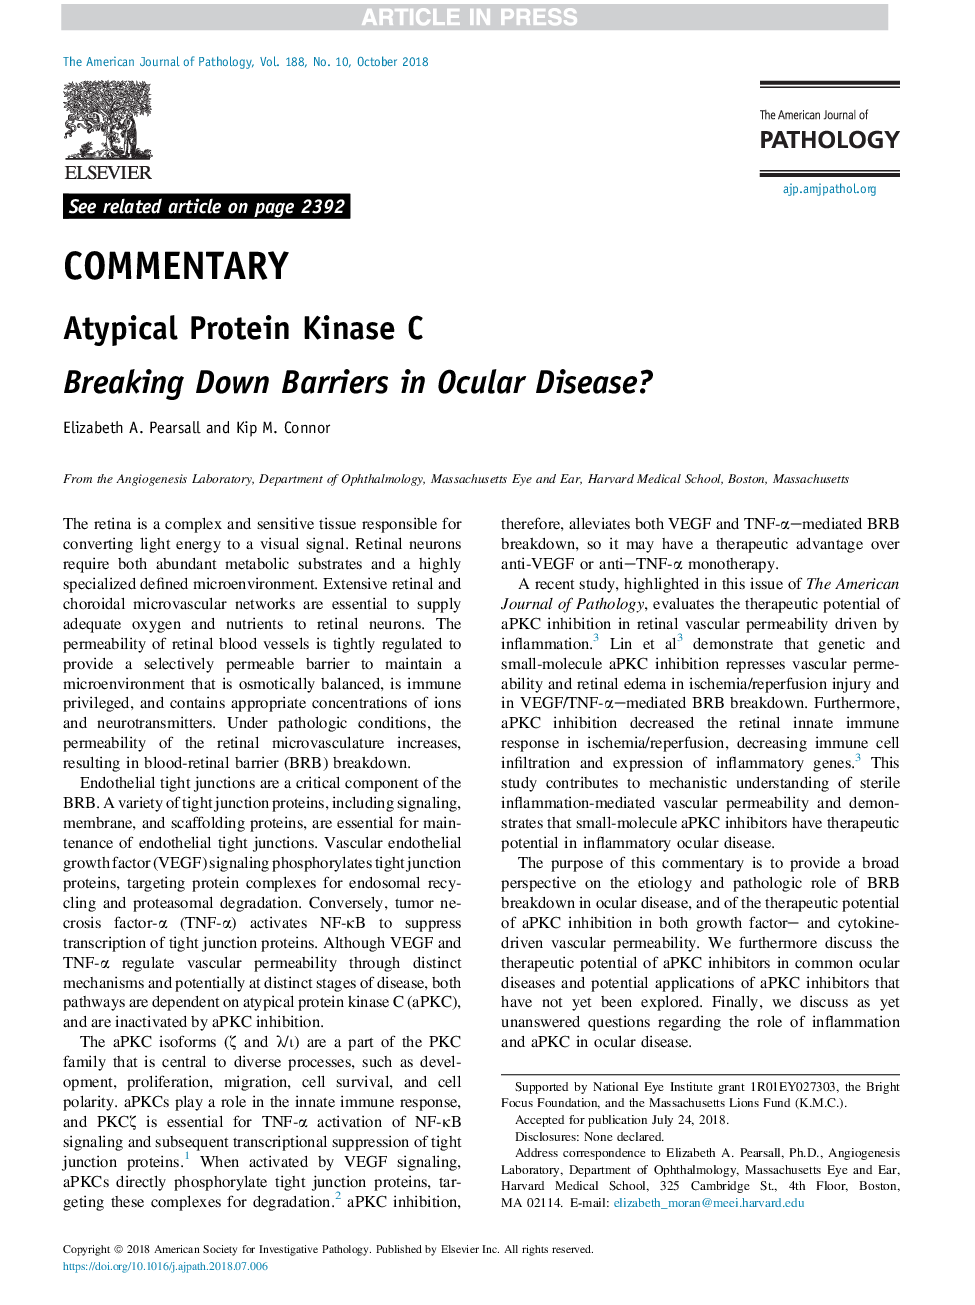 Atypical Protein Kinase C